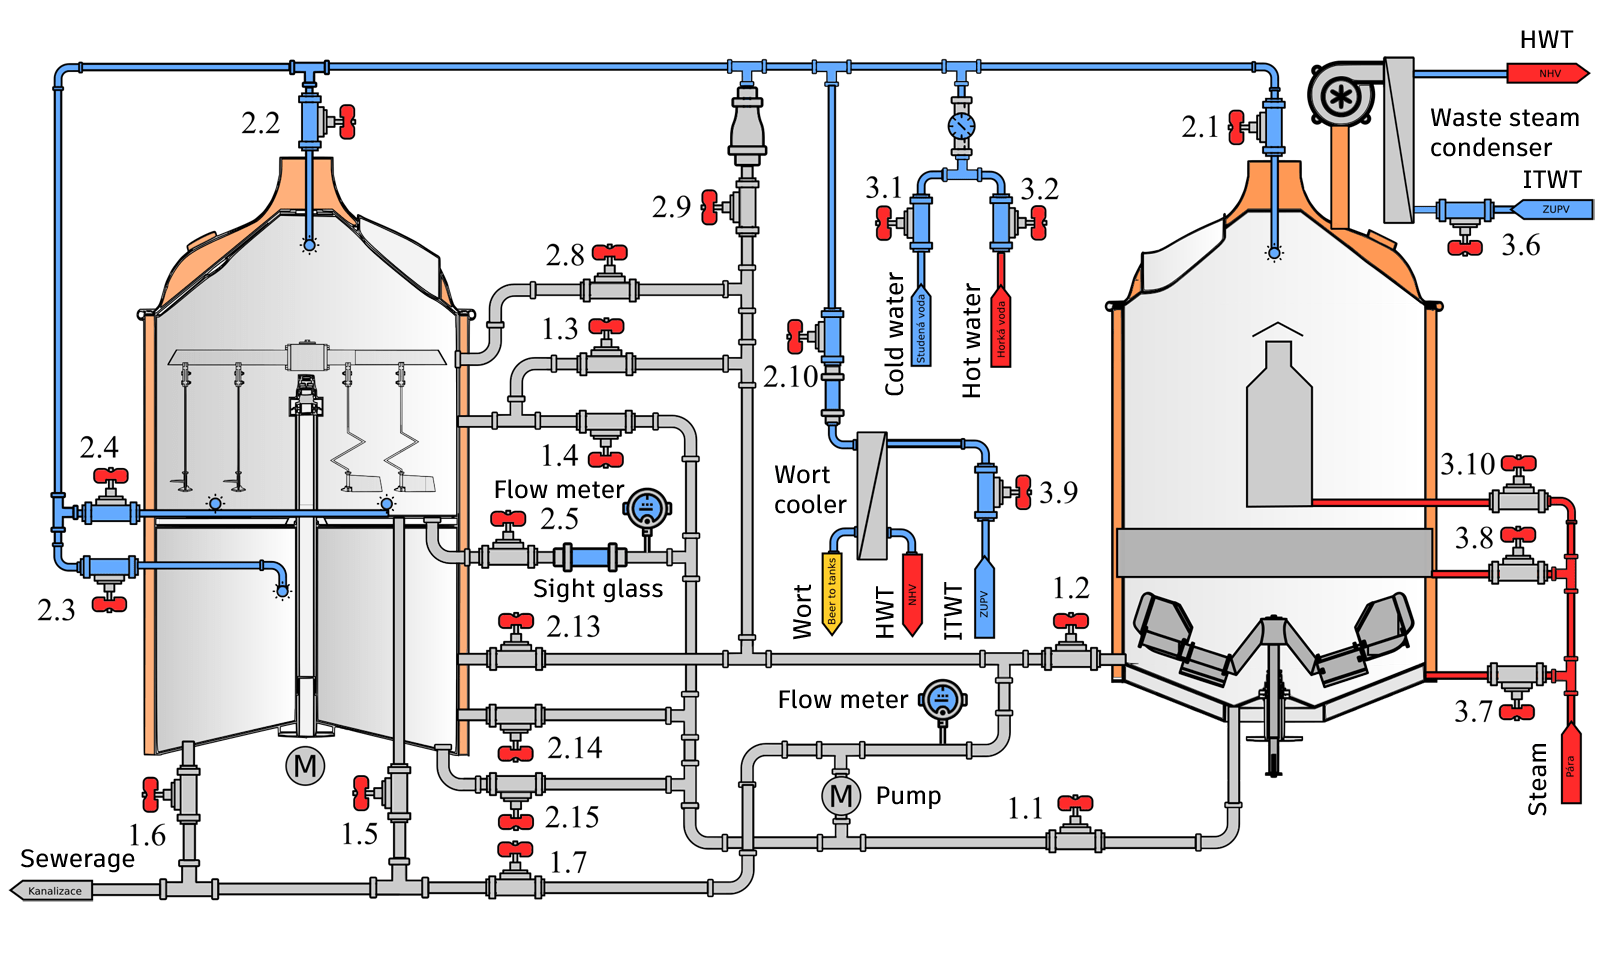 Autmatic control system for the Breworx Classic brewhouses